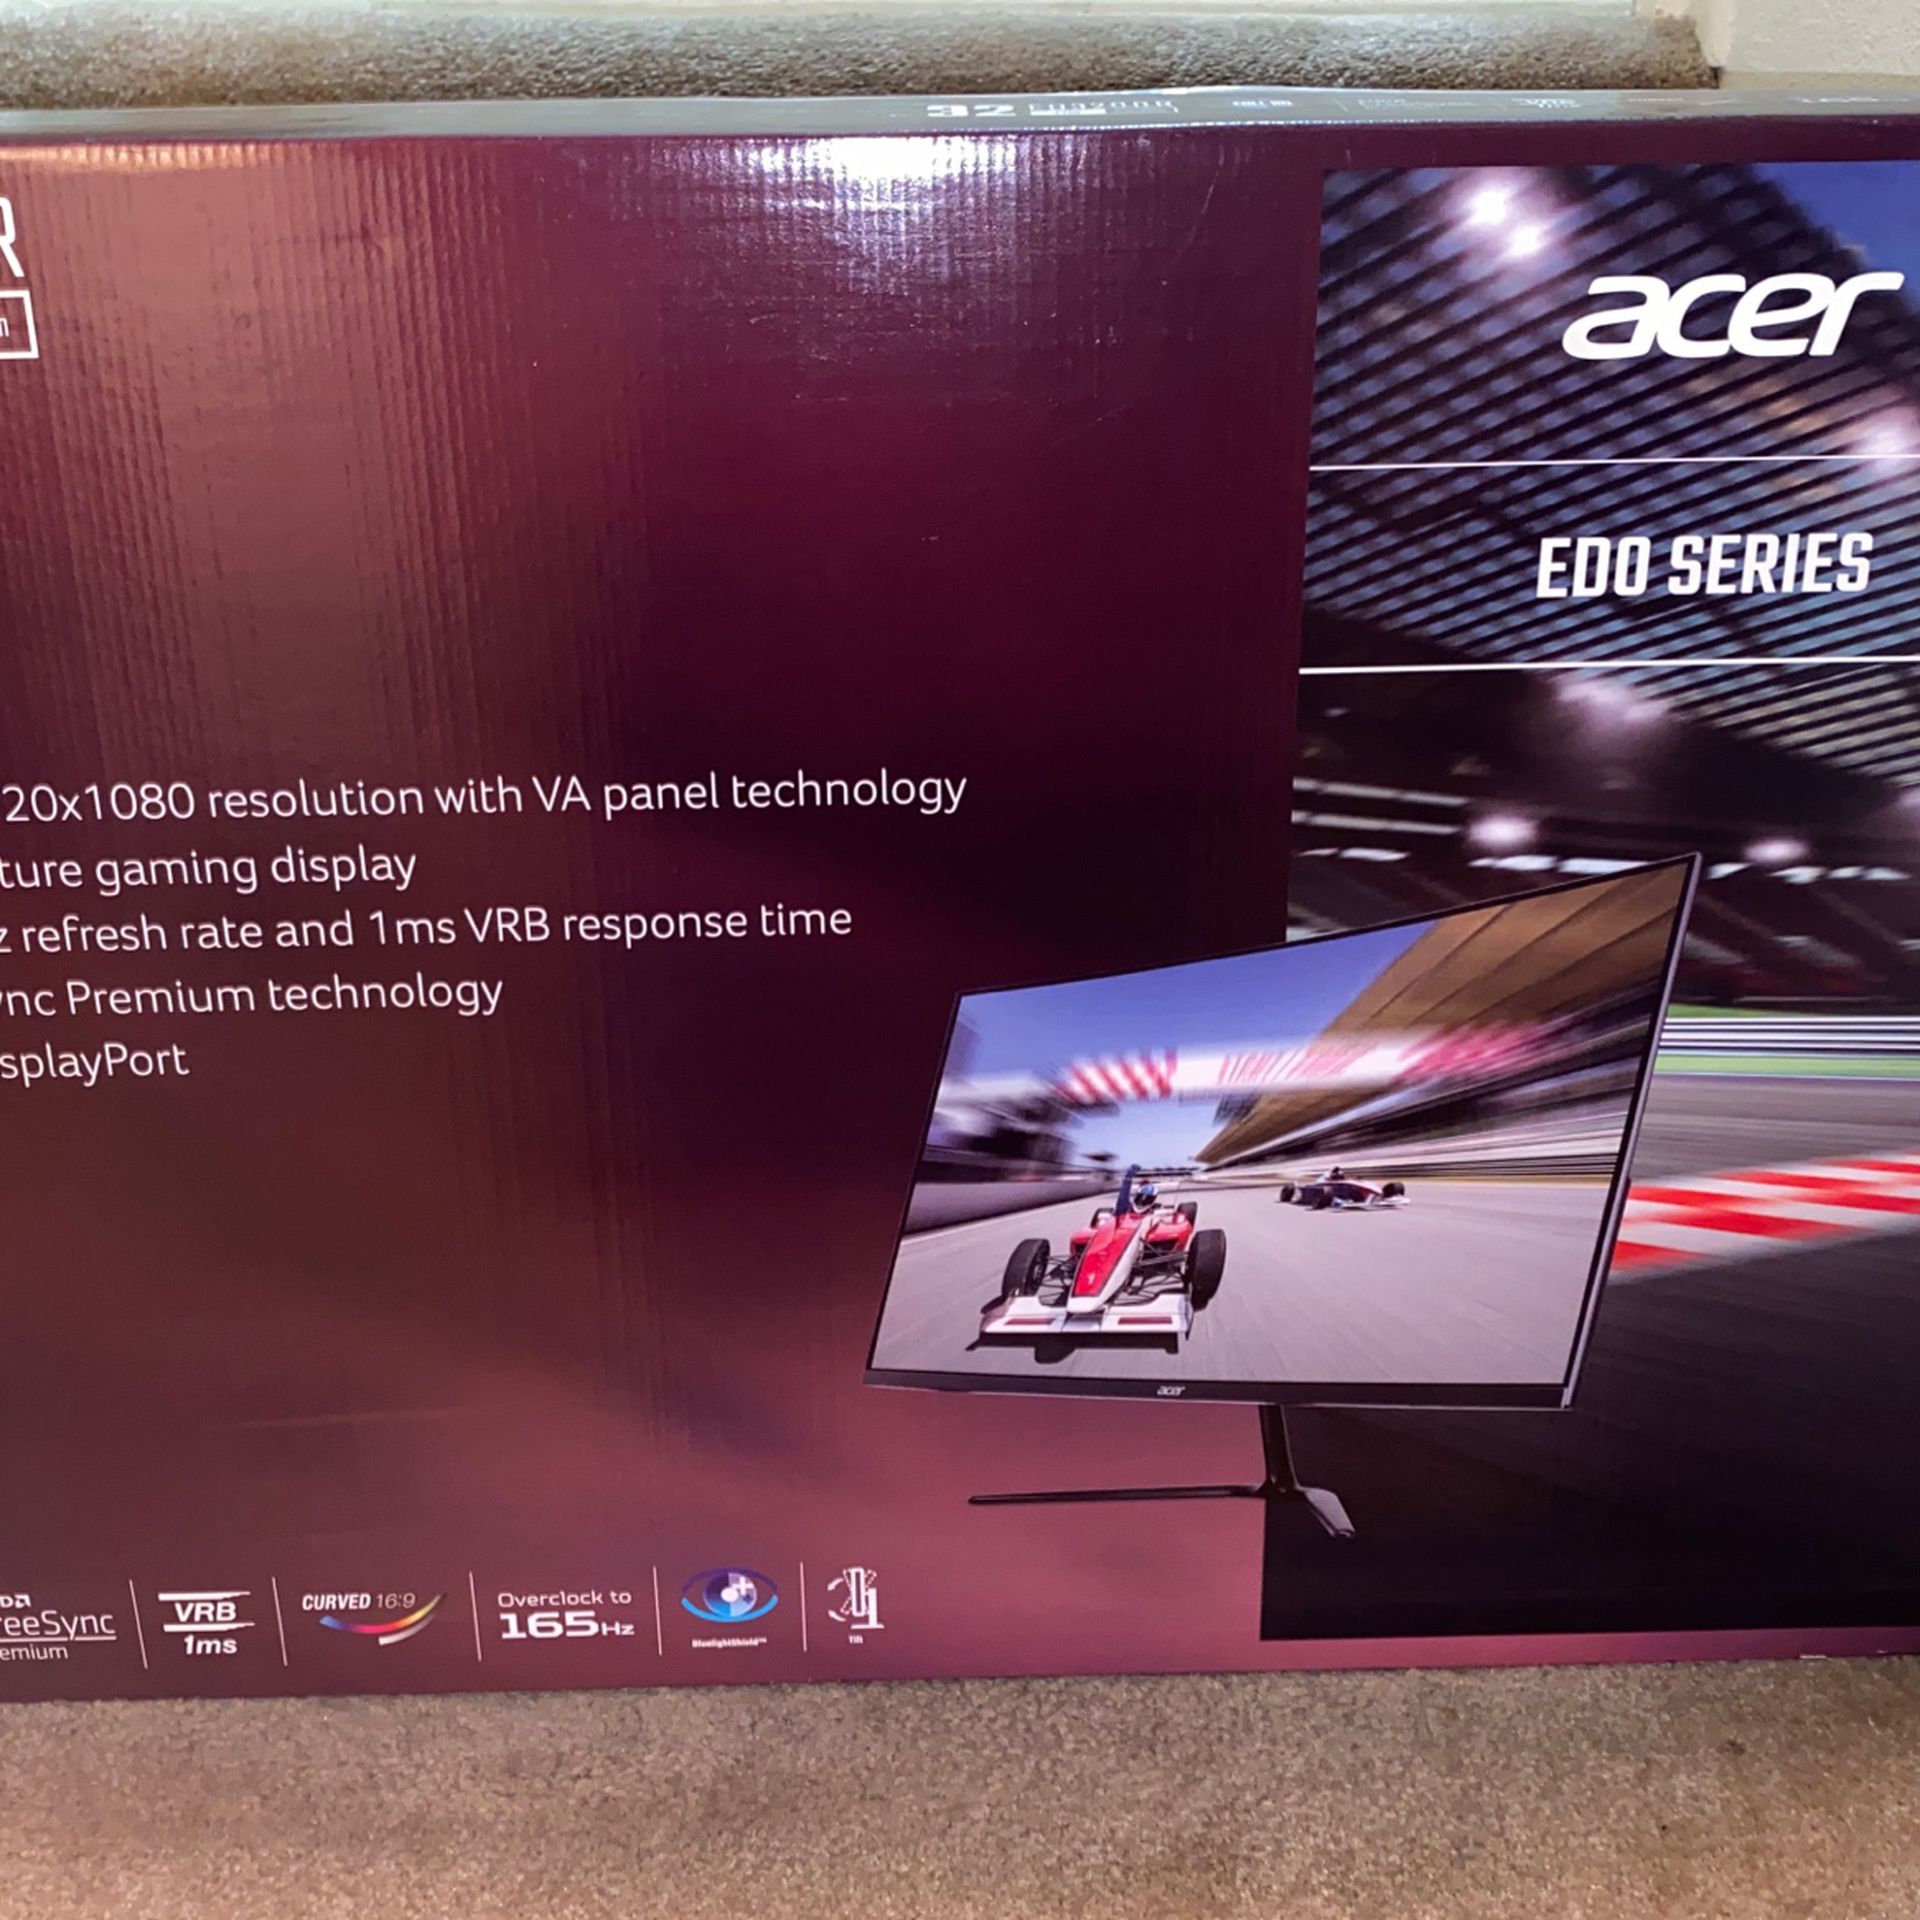 32” Inch Acer EDO Series CURVED !!! $$$